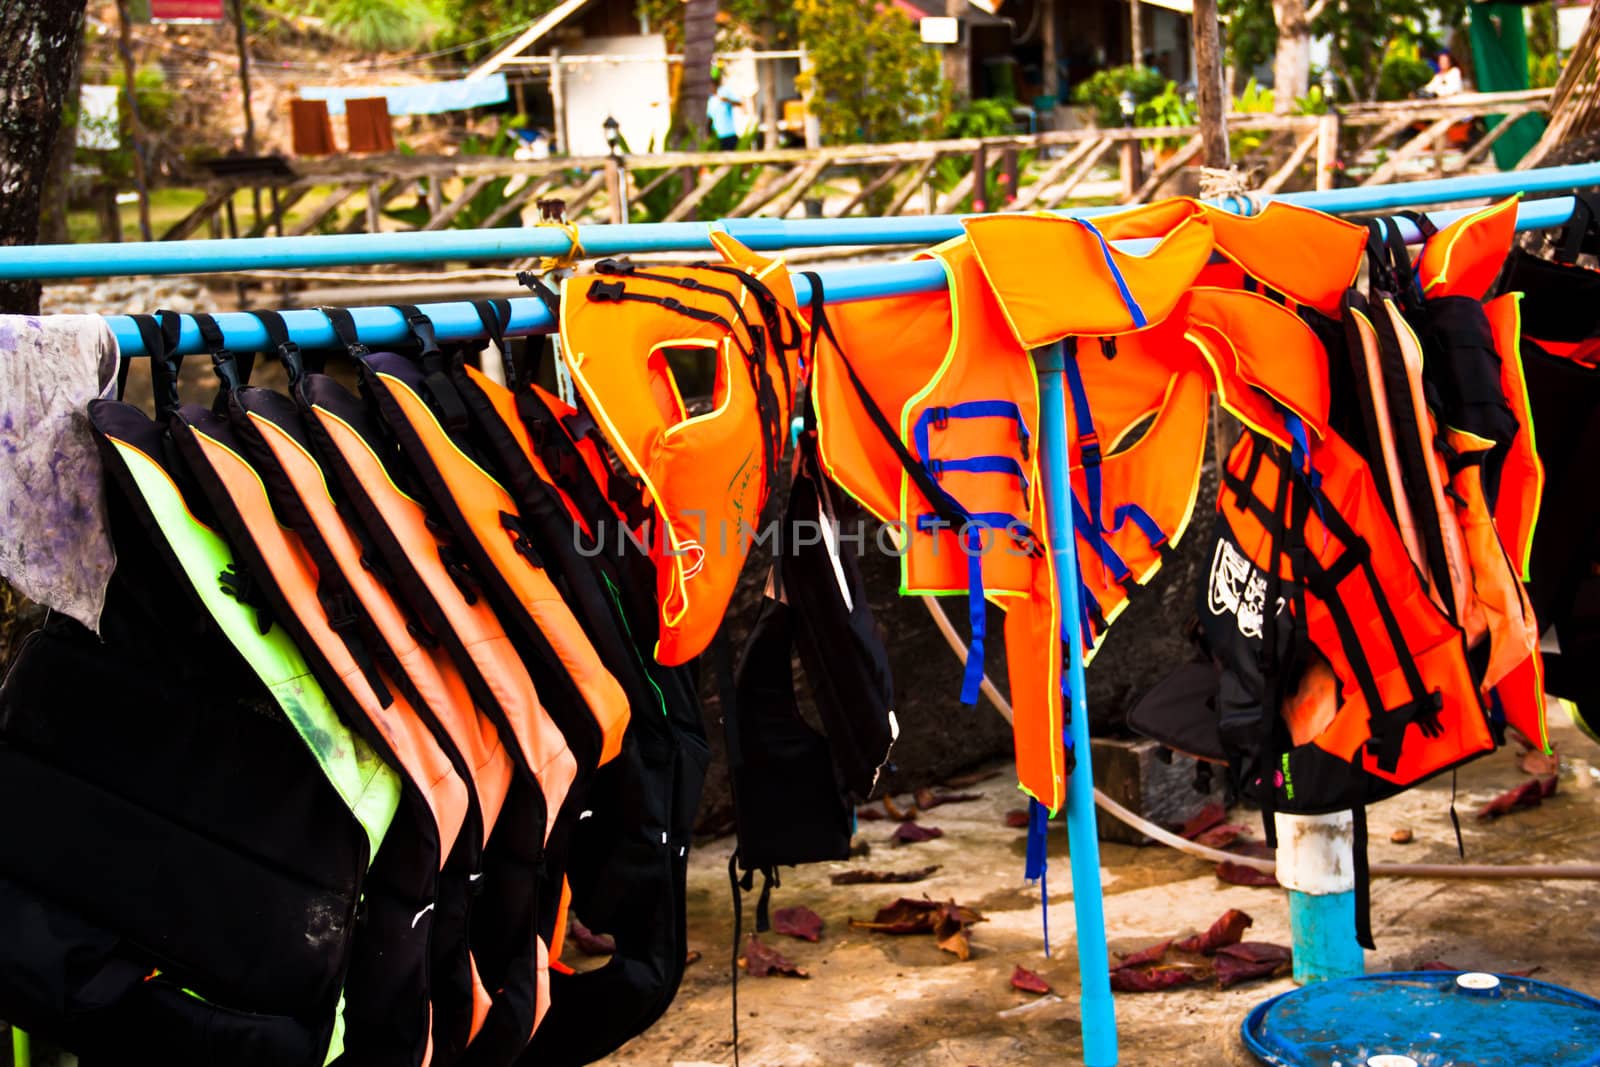 Many life jackets.  Were hung in the rack.